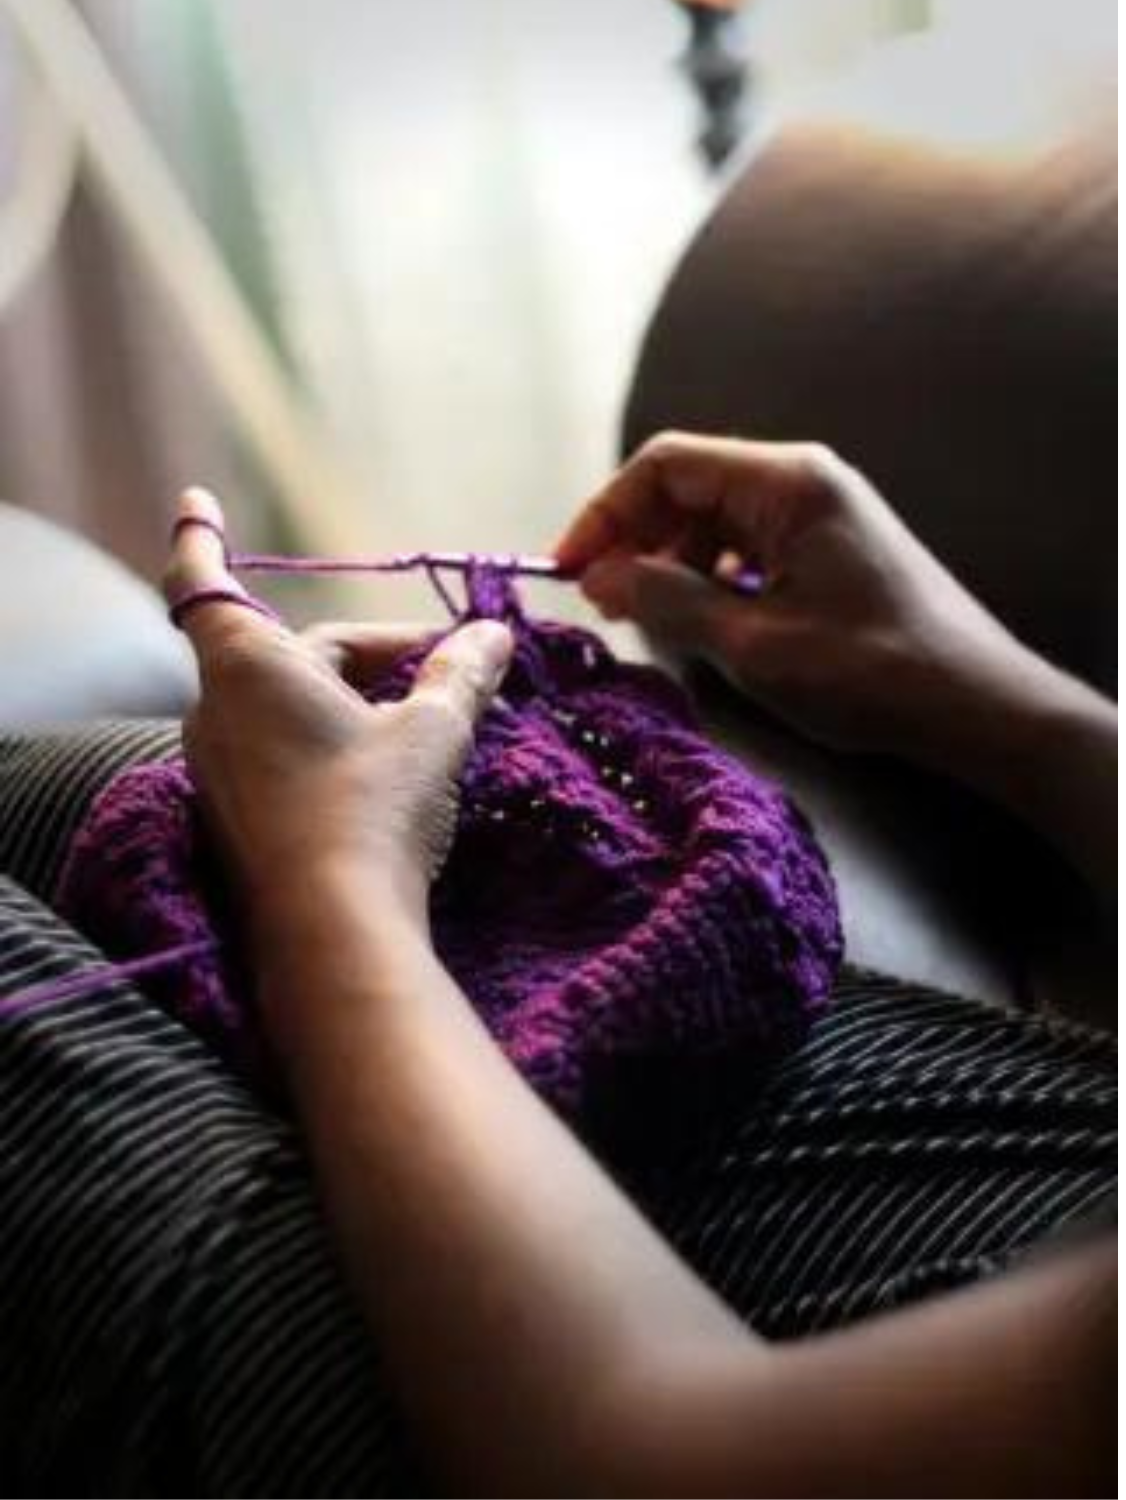 A woman reclines on a couch, working with a crochet hook and purple yarn.